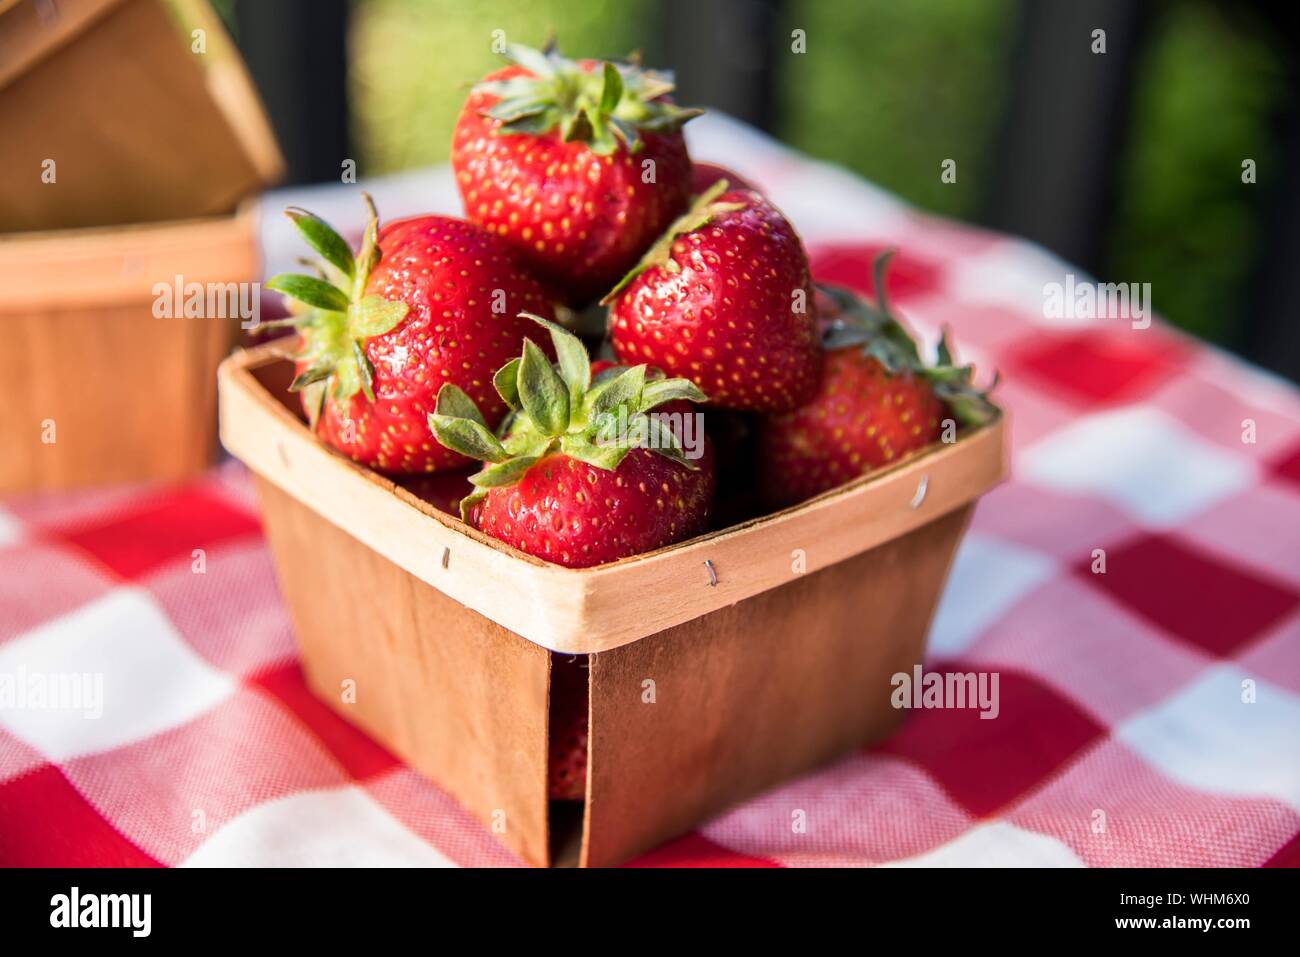 Close-up Of Fresh Strawberries In Wooden Basket On Table Stock Photo